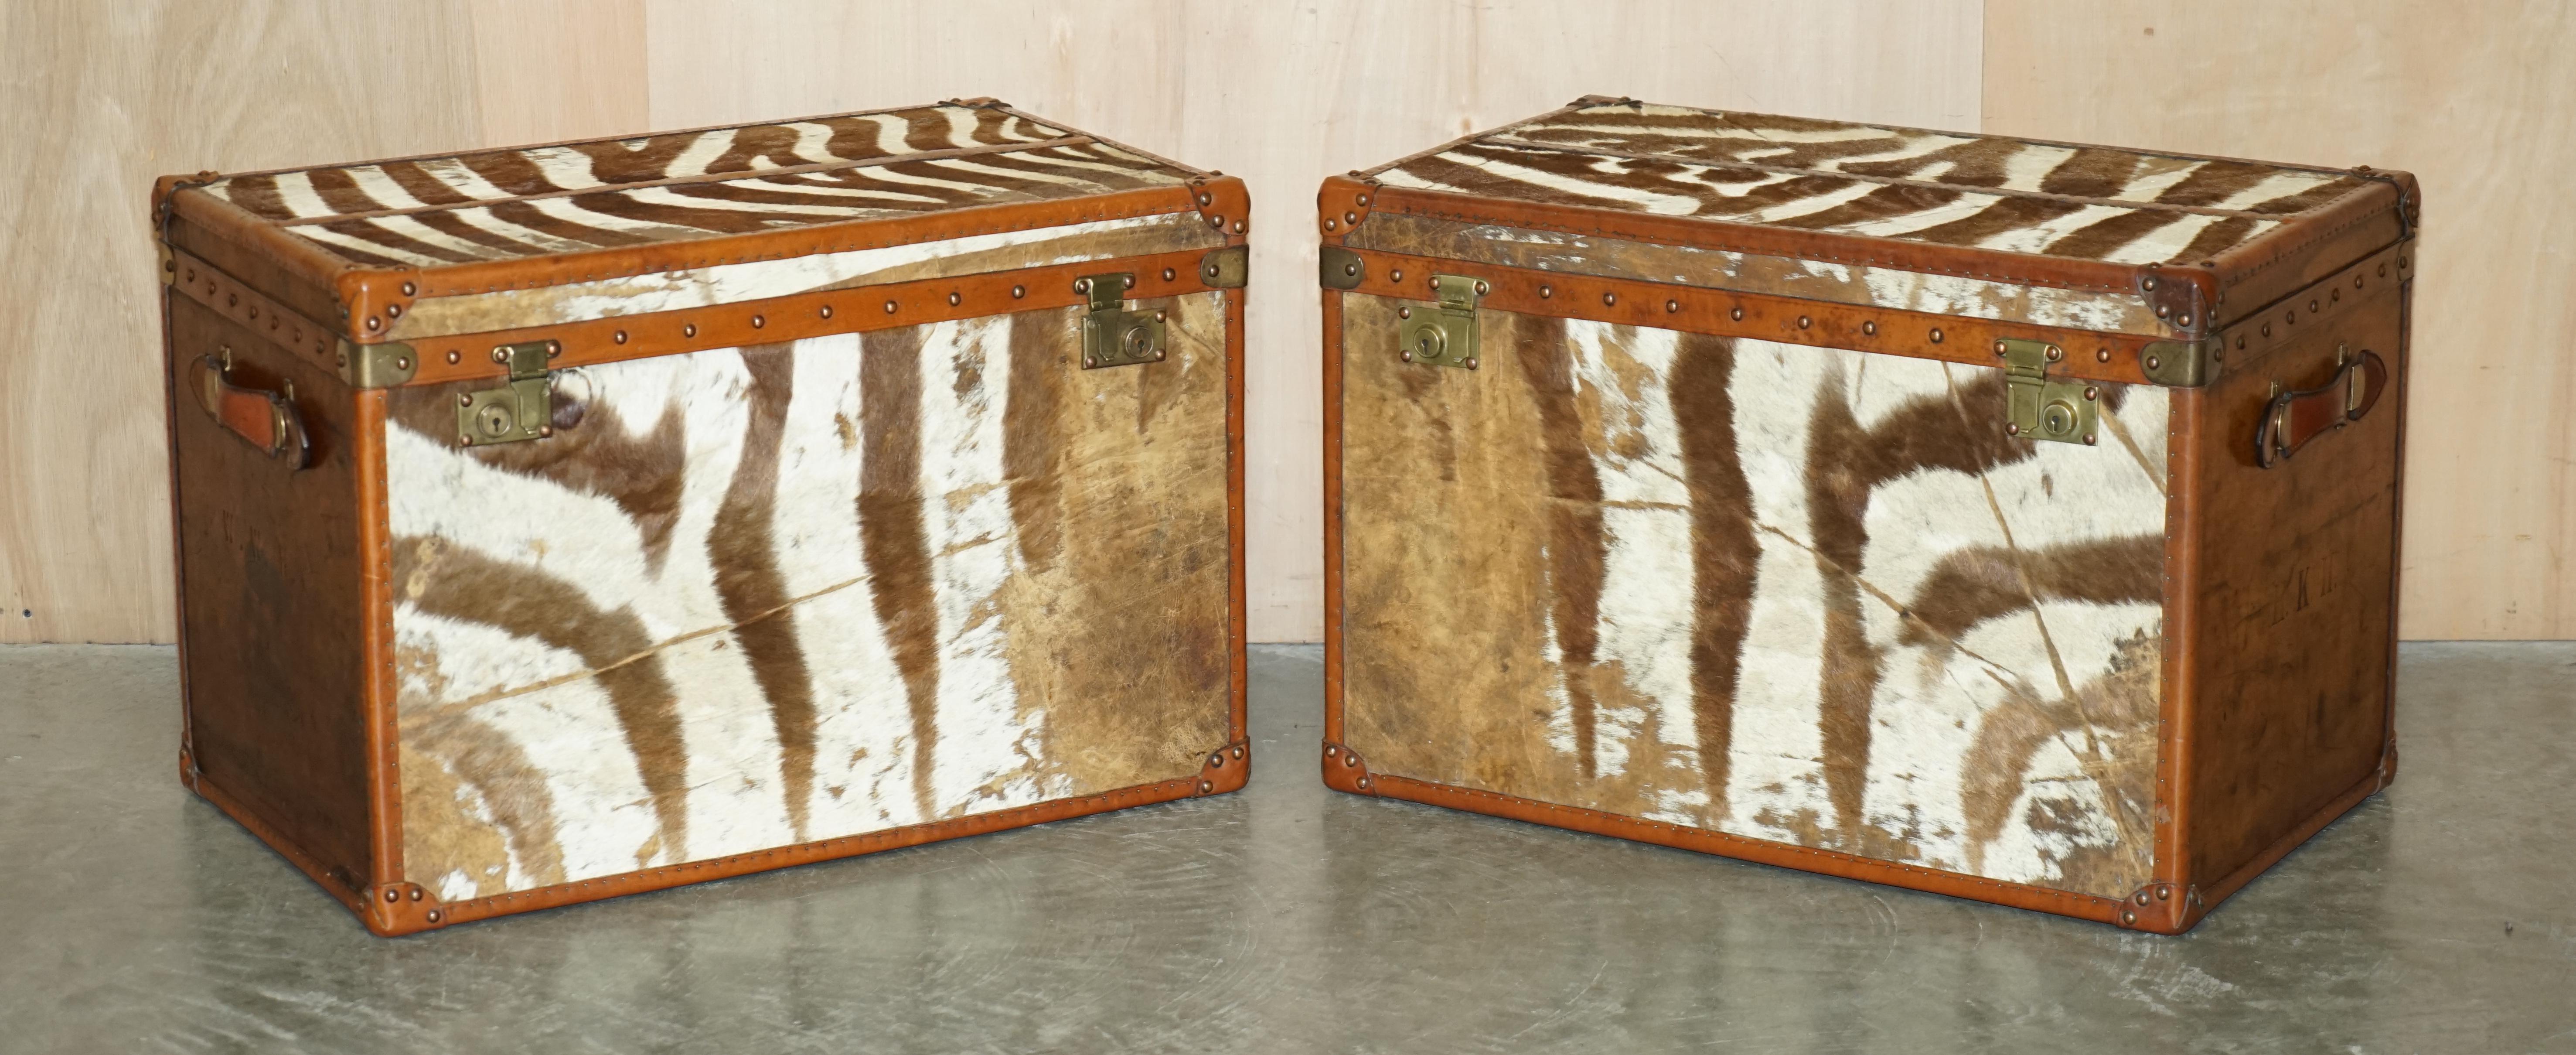 Royal House Antiques

Royal House Antiques is delighted to offer for sale this exquisite and super rare pair of Zebra skin & brown Leather upholstered steamer trunks circa 1920

Please note the delivery fee listed is just a guide, it covers within